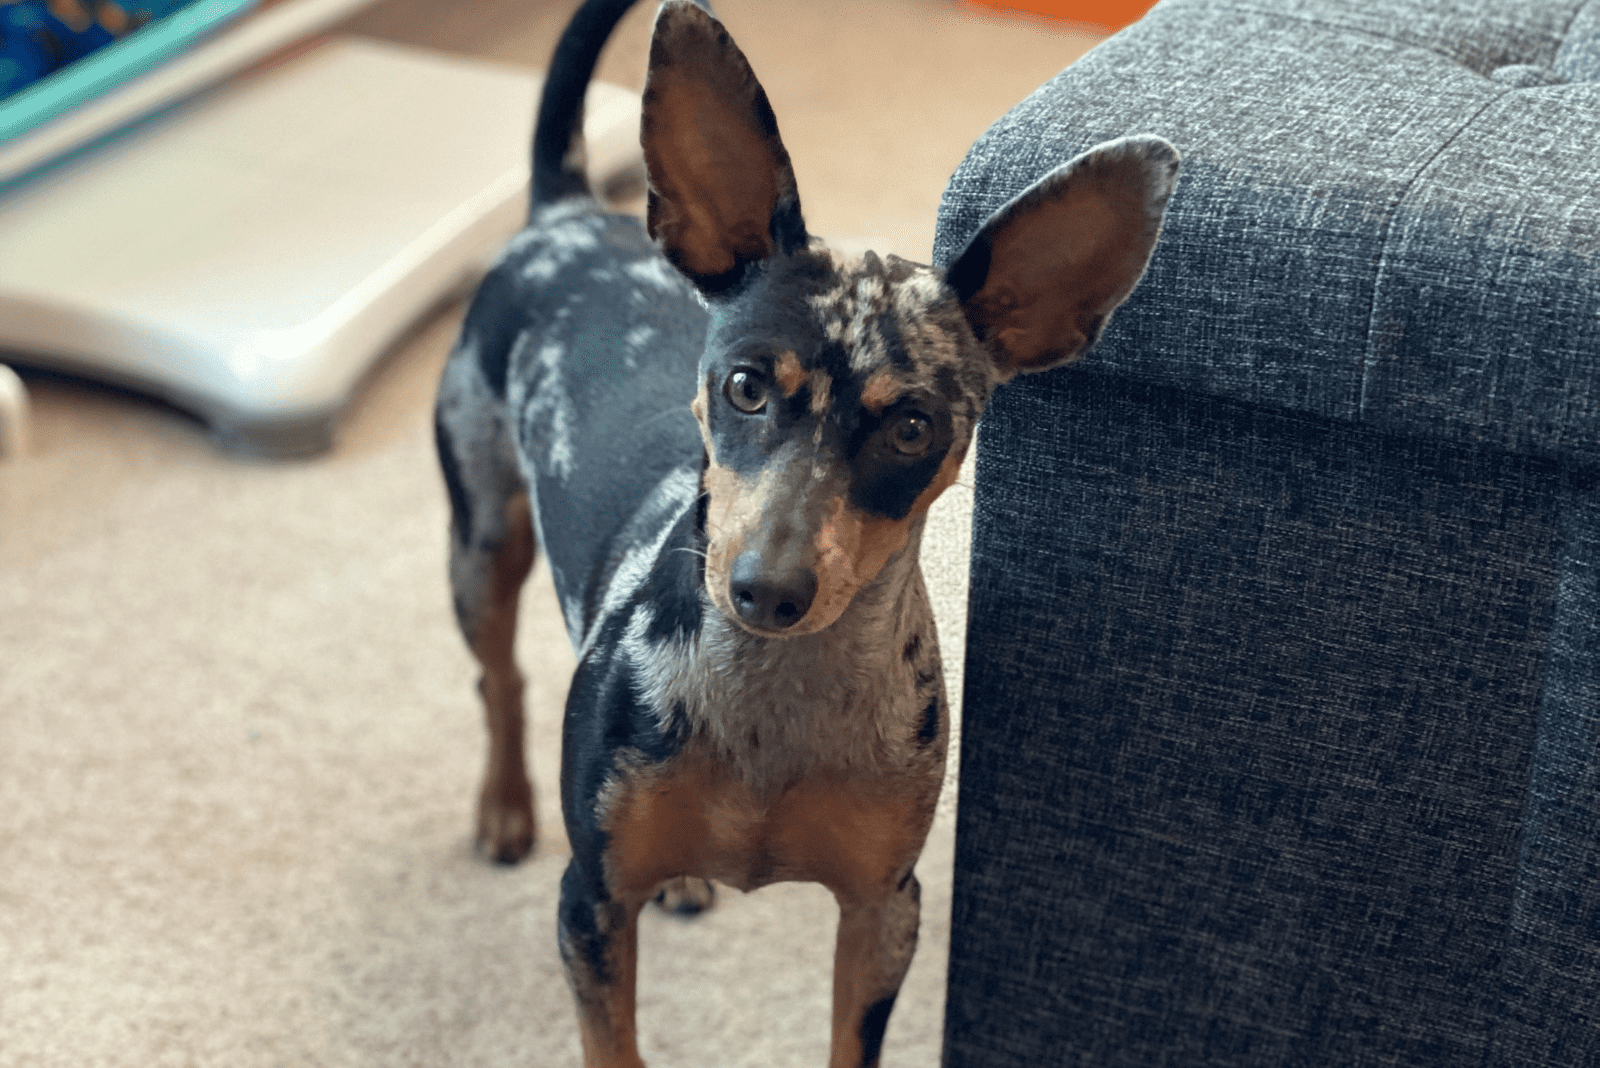 Harlequin Pinscher is standing and looking at the camera